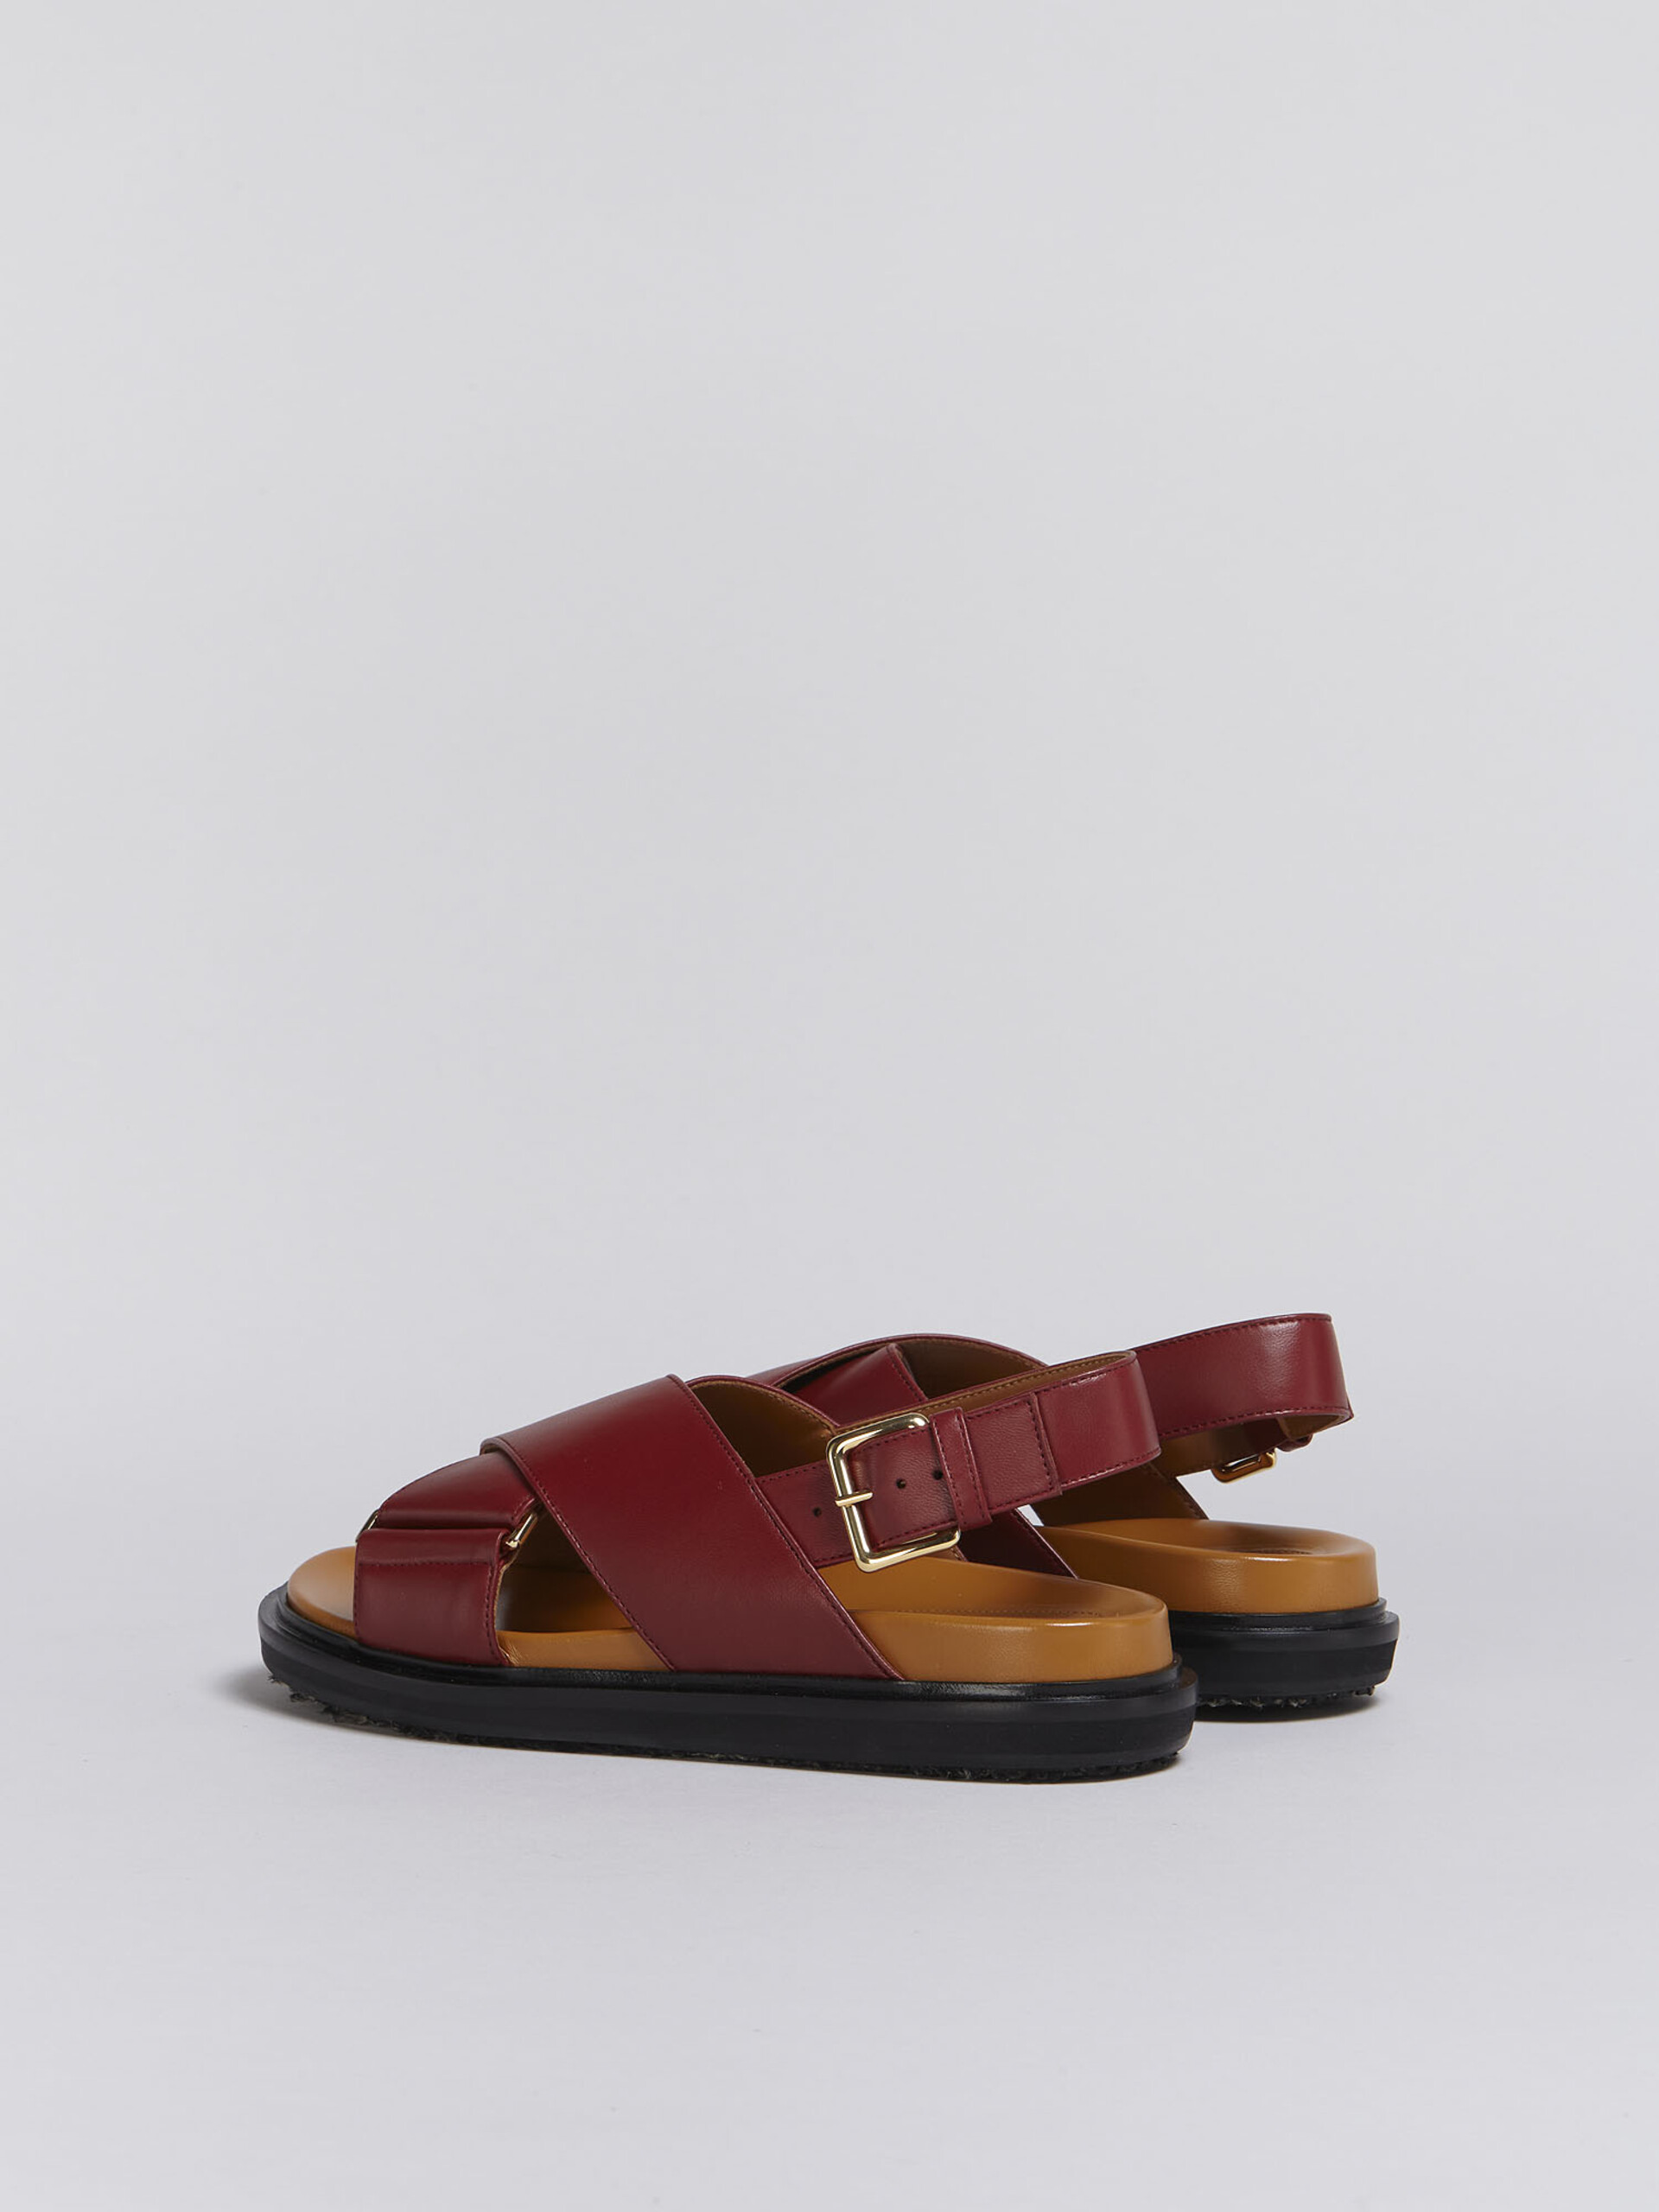 Red leather fussbett - Sandals - Image 3